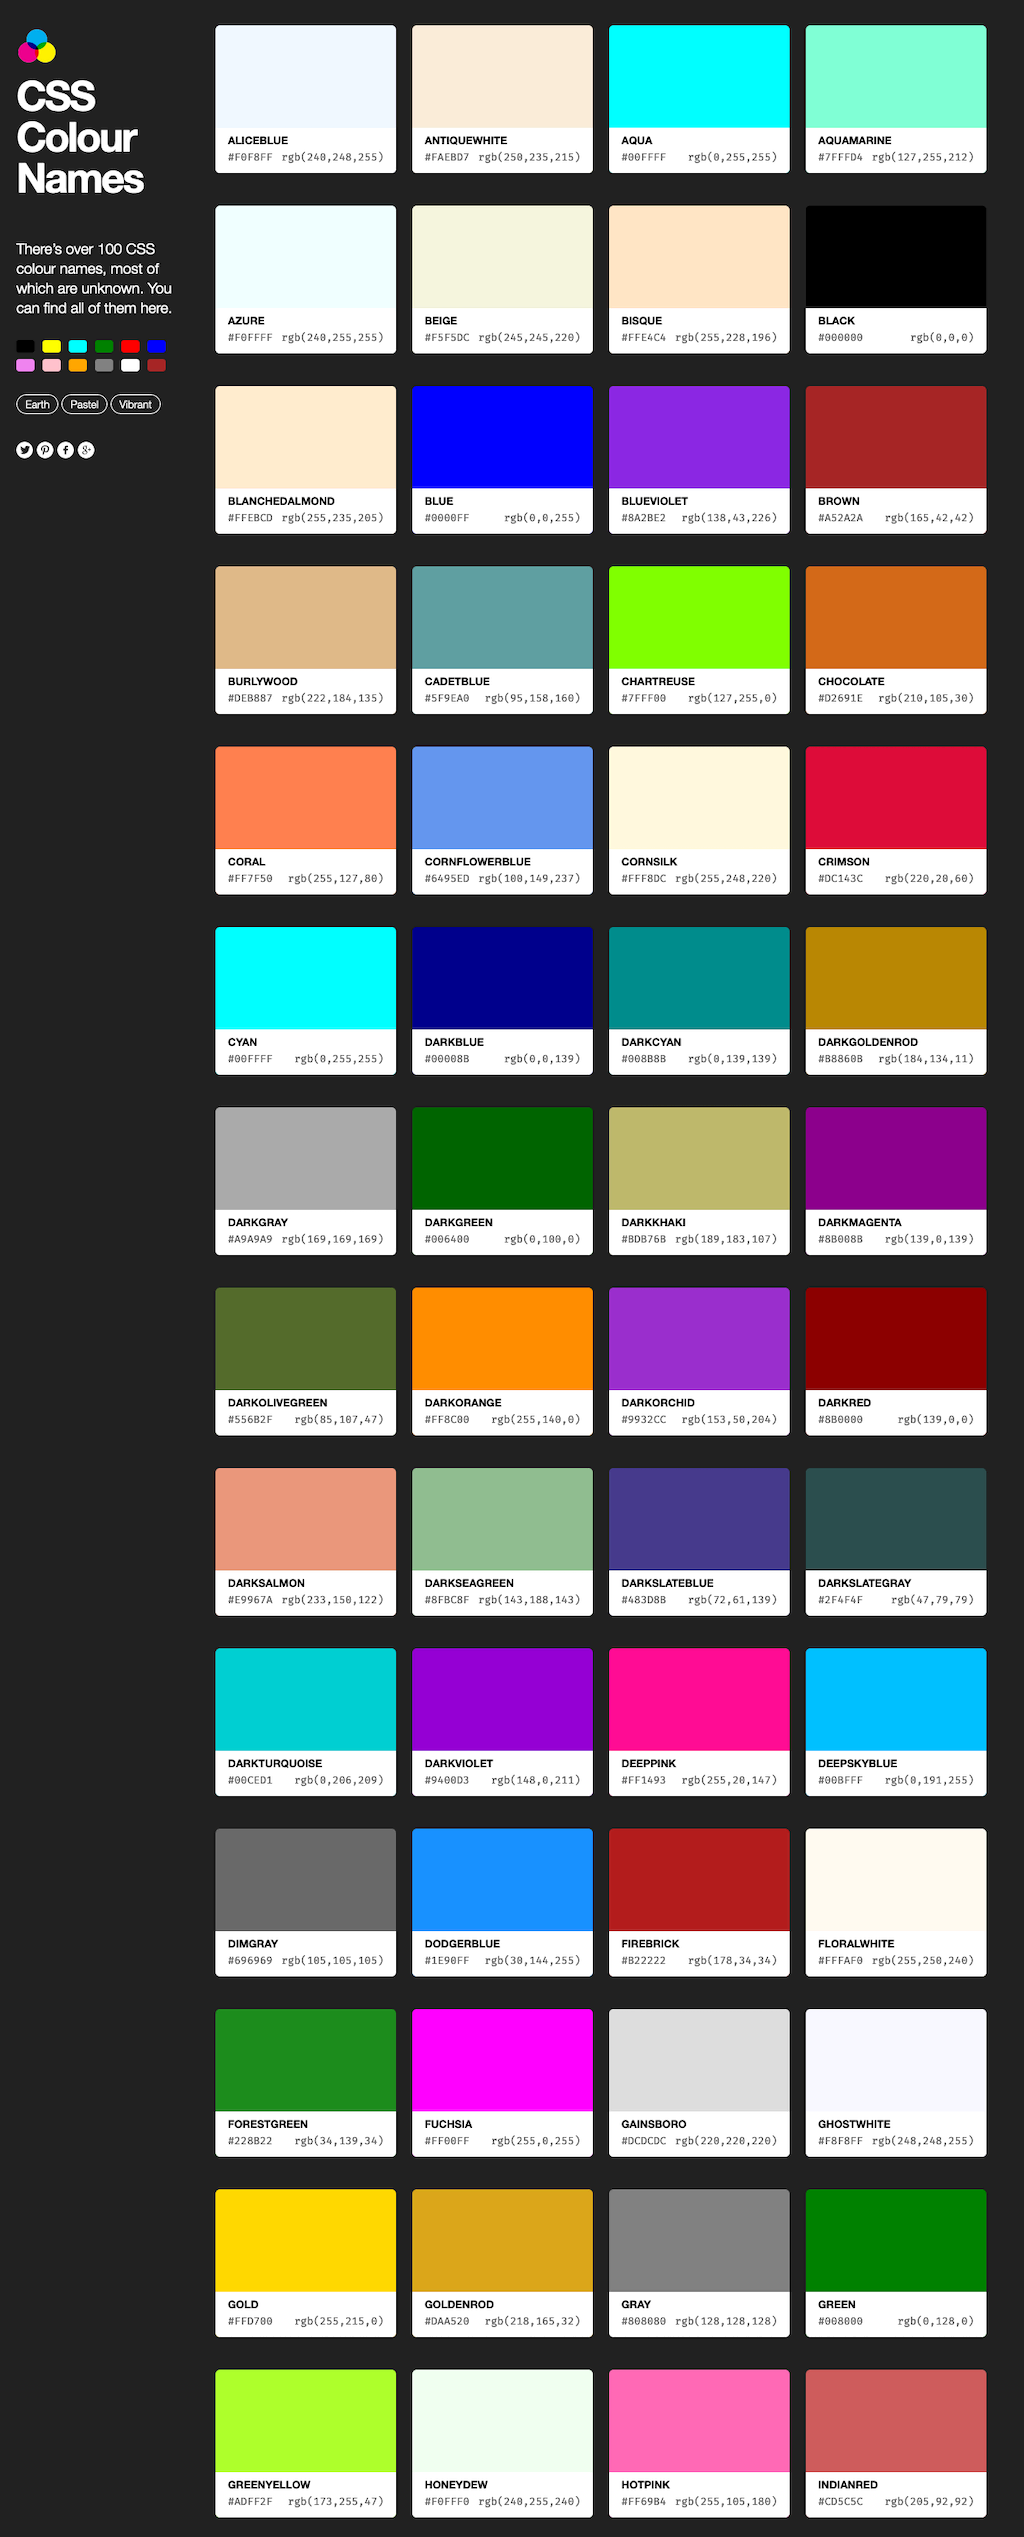 Screenshot of a directory of CSS colour names.